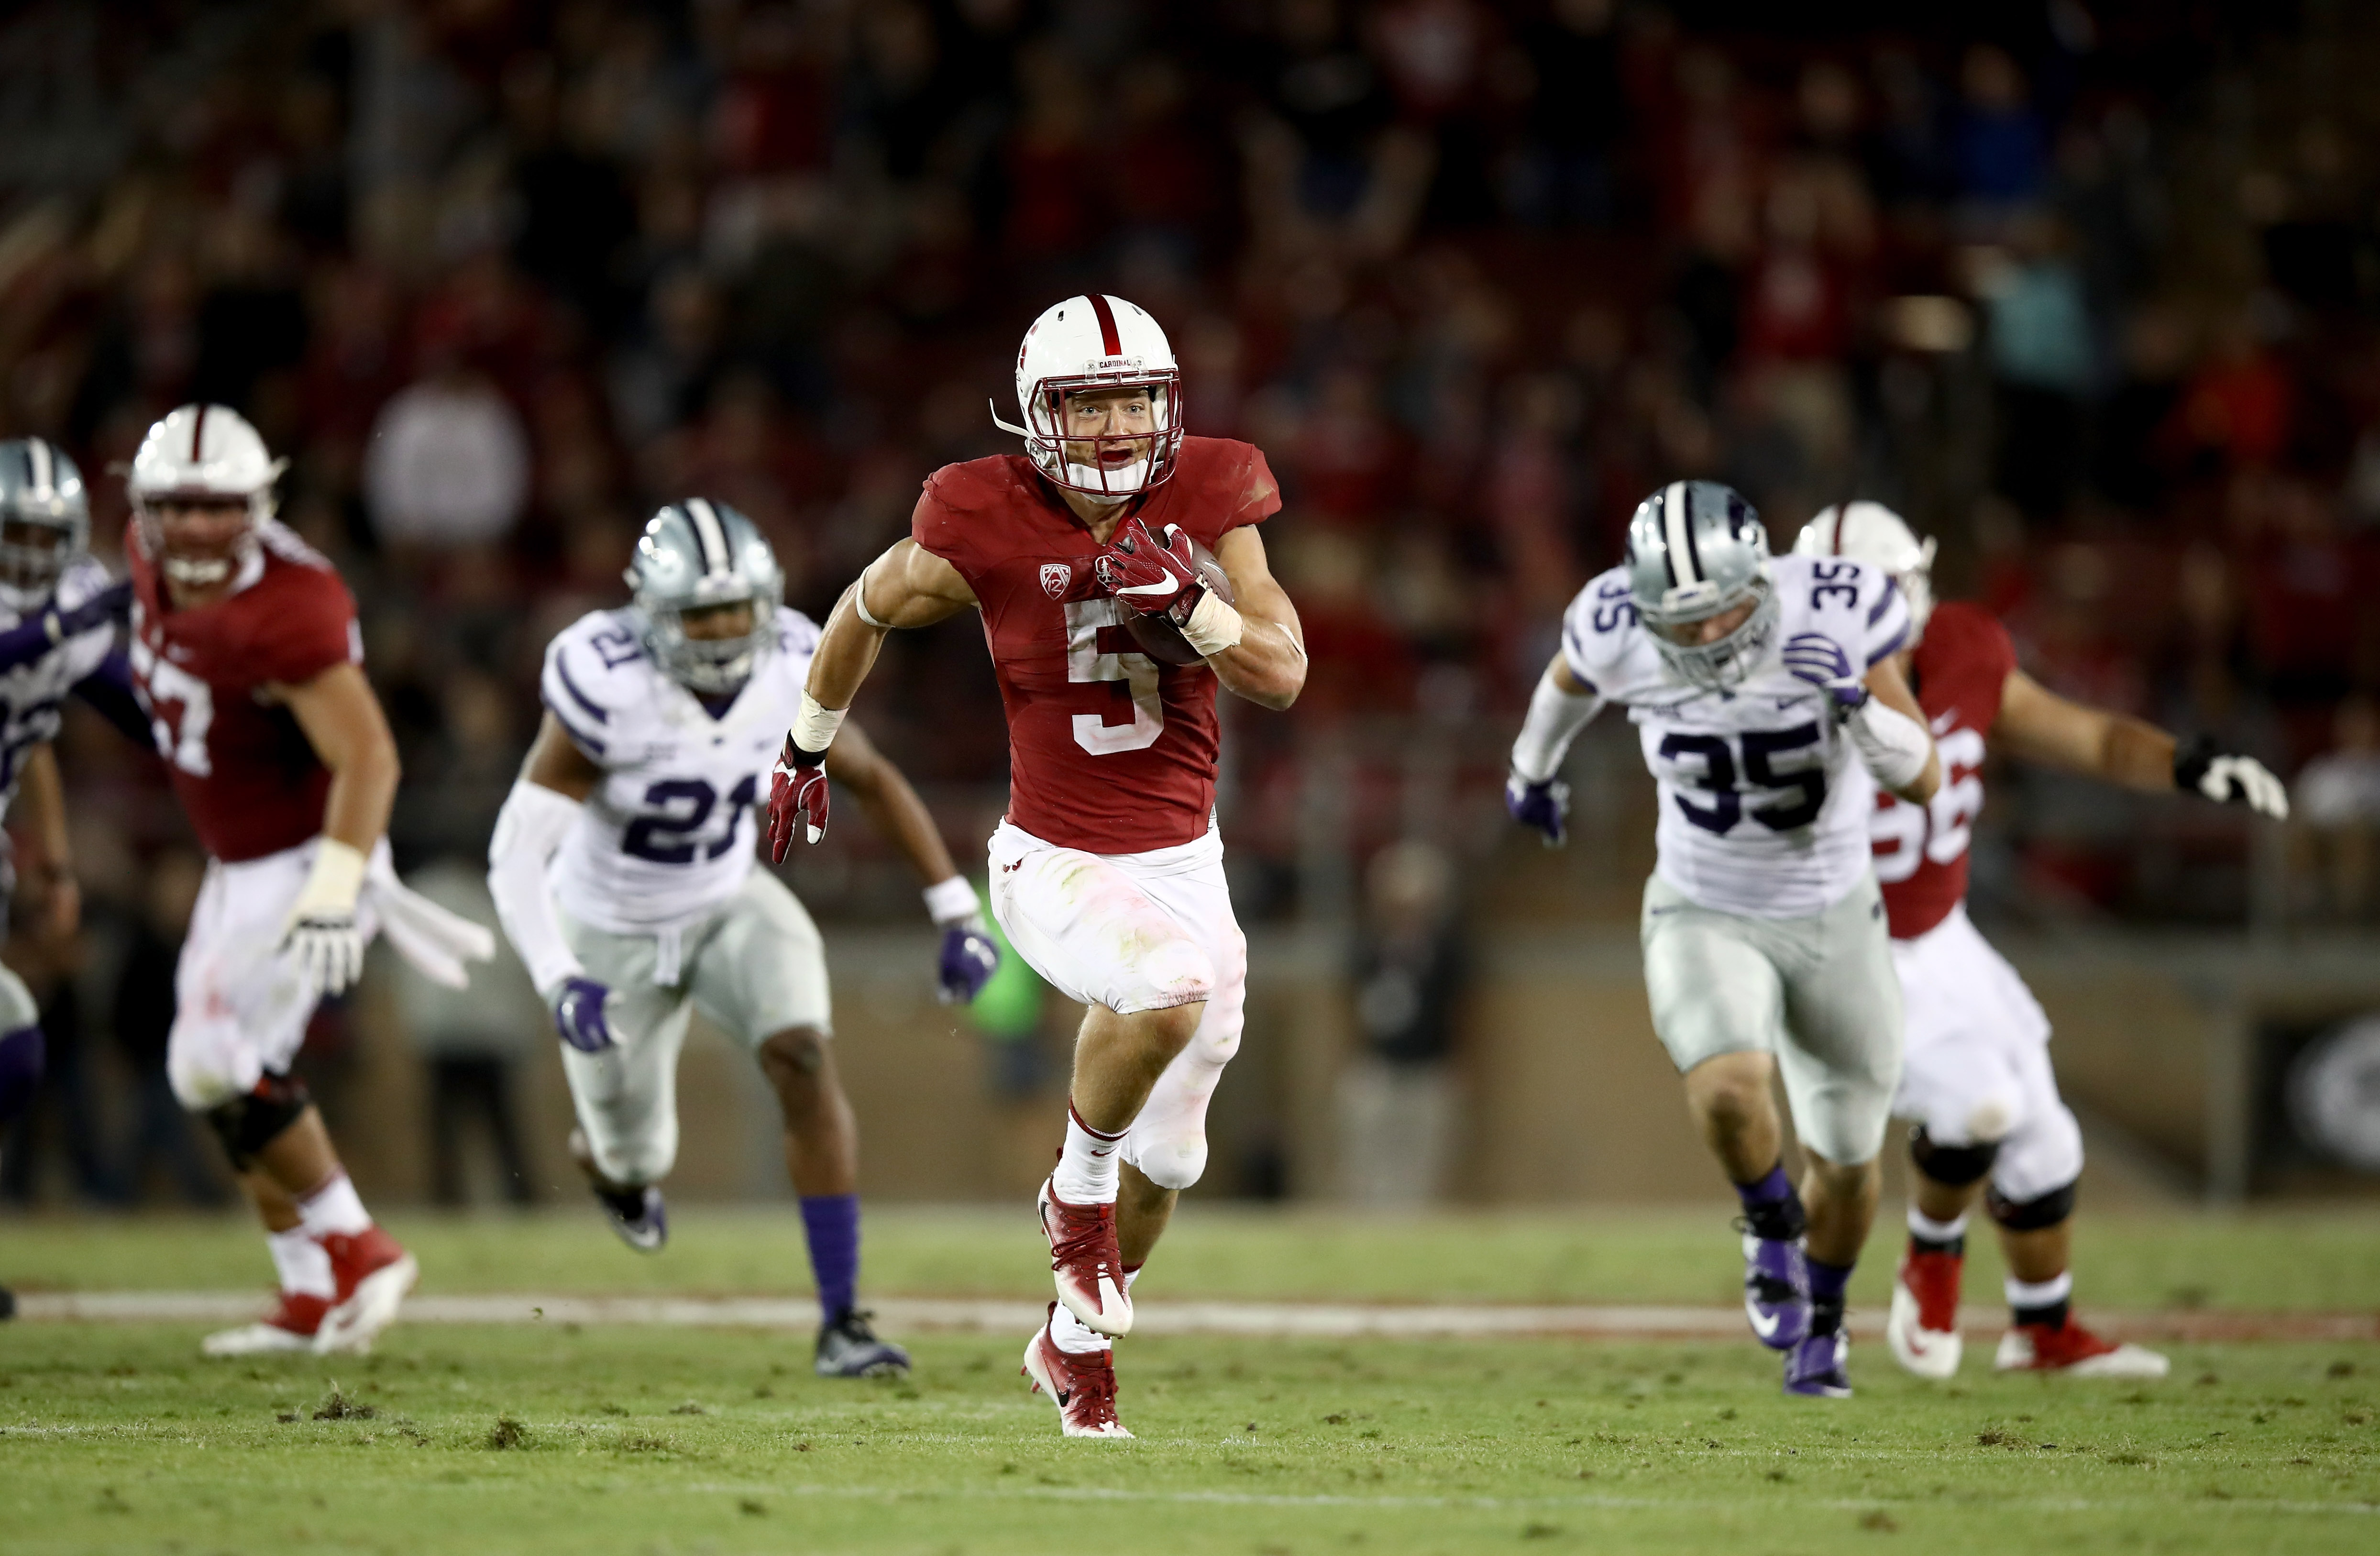 Stanford vs. UCLA Live Stream How to Watch Game Online